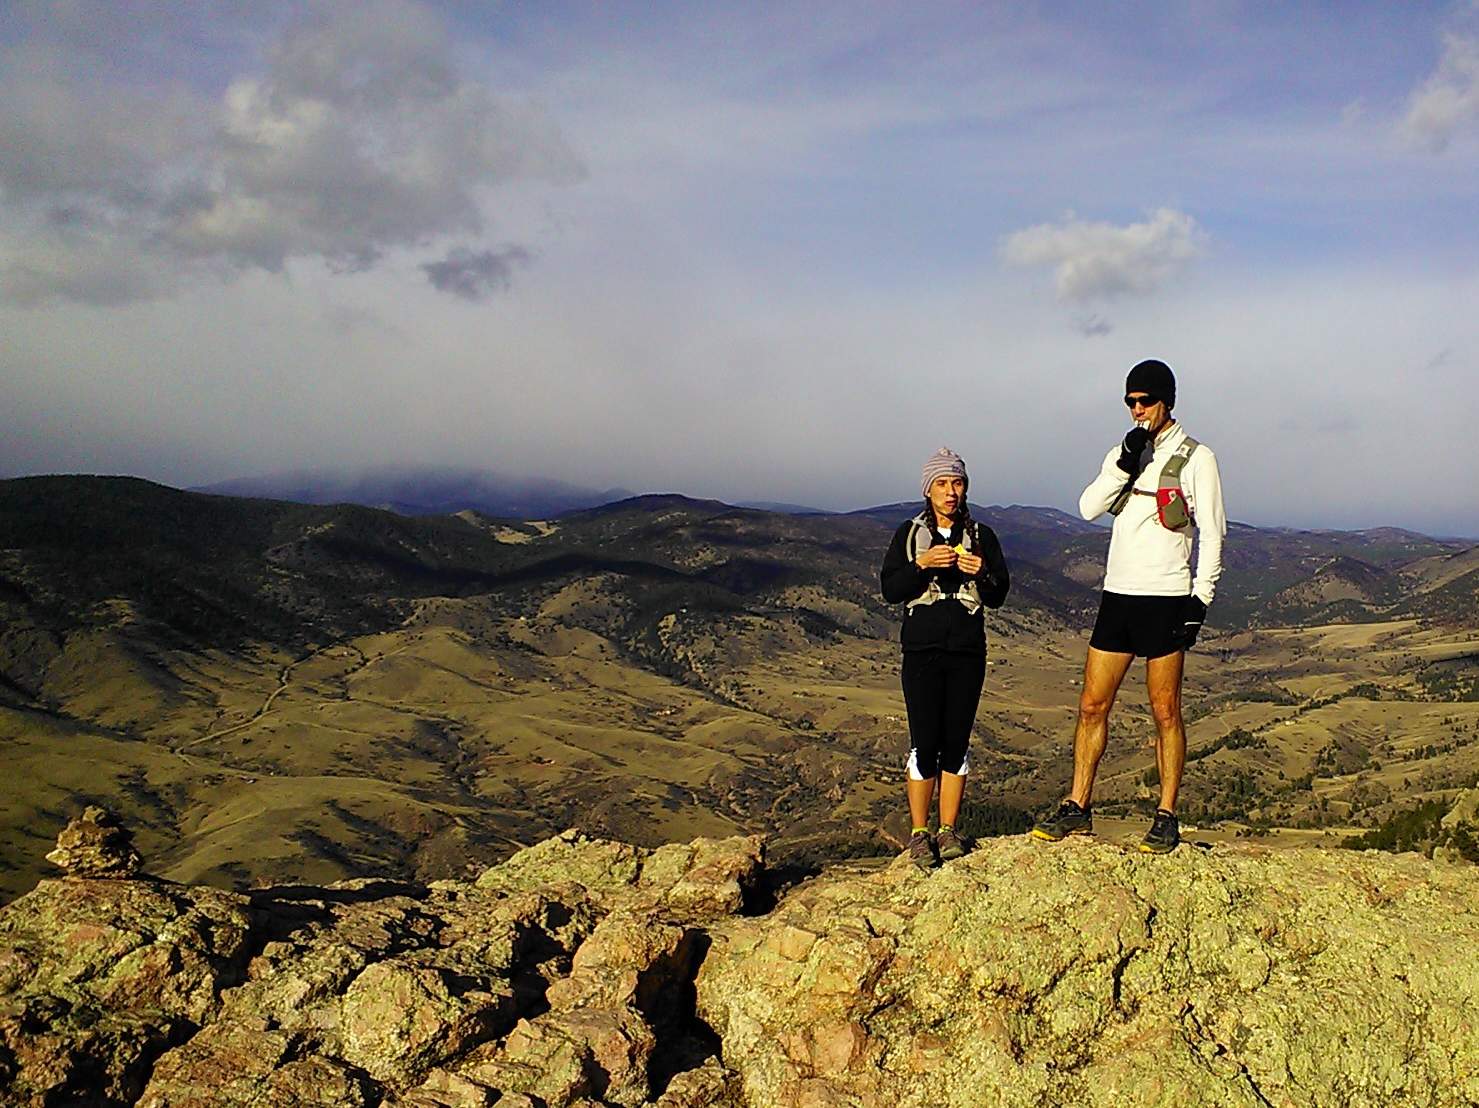 [Mile 3.5] Victoria and another runner at the top of Horsetooth Rock taking a quick food break.